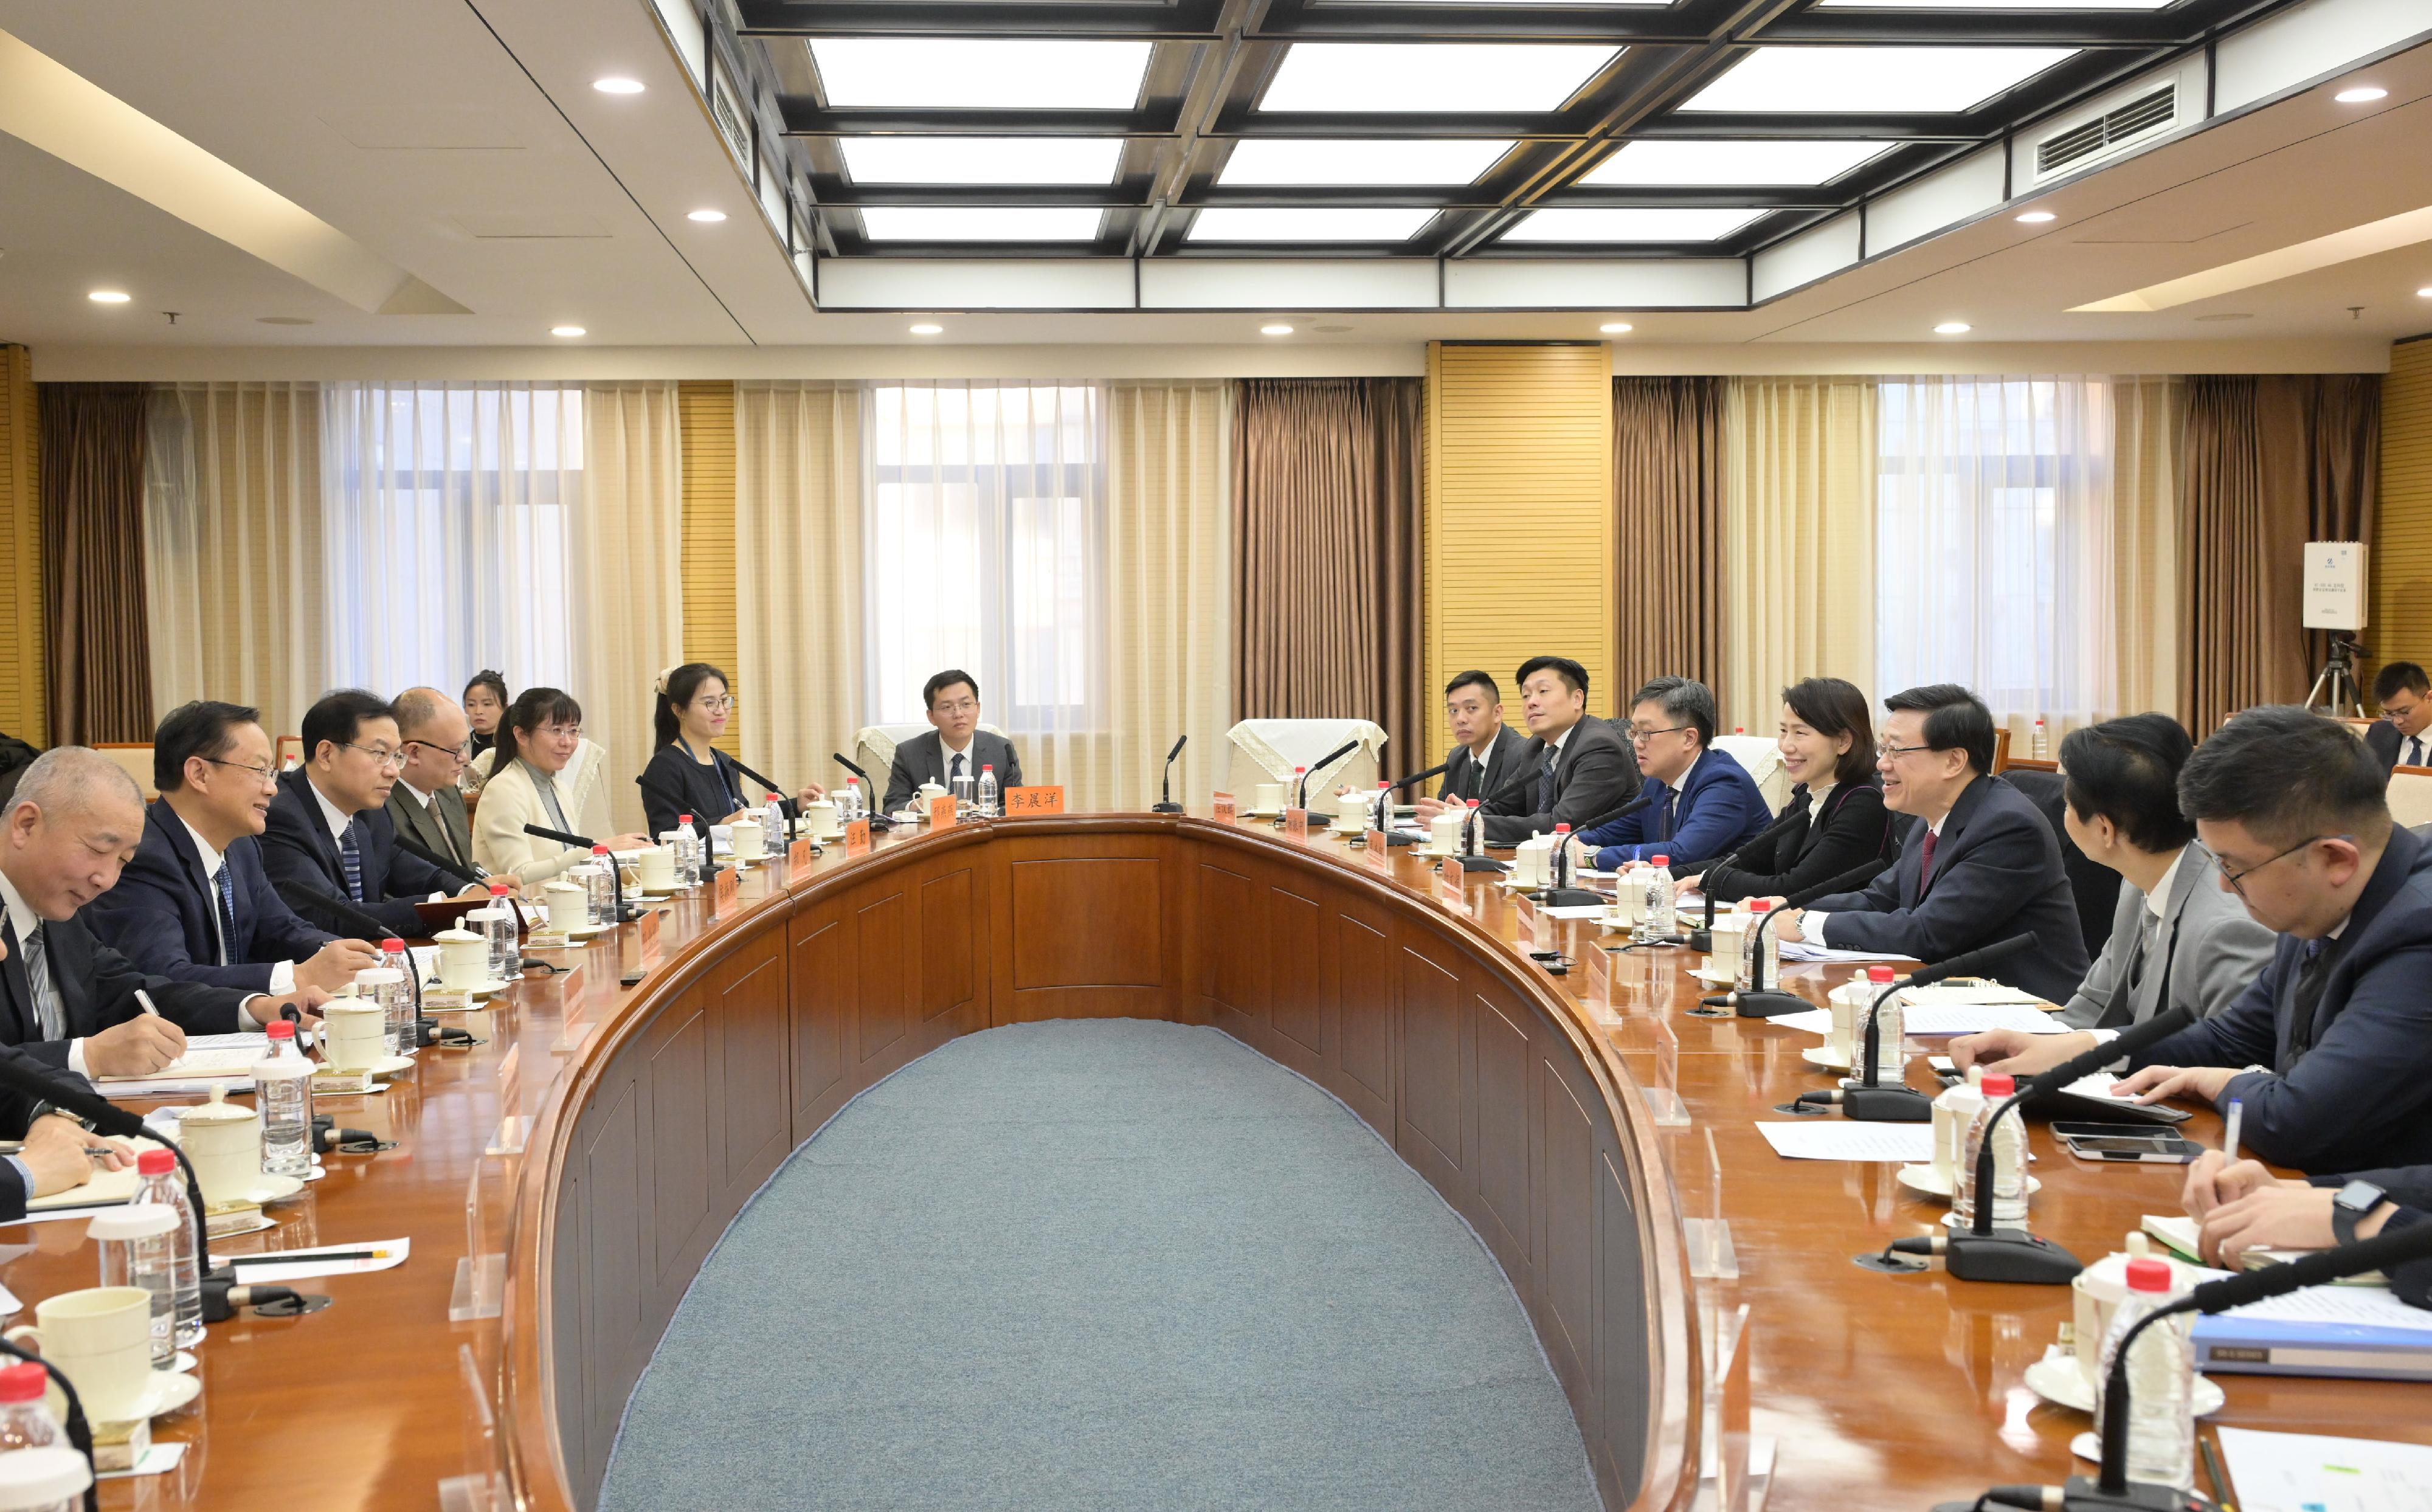 The Chief Executive, Mr John Lee (third right), meets with the Party Secretary of the Ministry of Culture and Tourism, Mr Sun Yeli (second left), in Beijing today (December 19). The Director of the Chief Executive's Office, Ms Carol Yip (fourth right), and the Director of the Office of the Government of the Hong Kong Special Administrative Region in Beijing, Mr Rex Chang (second right), also attend. 

